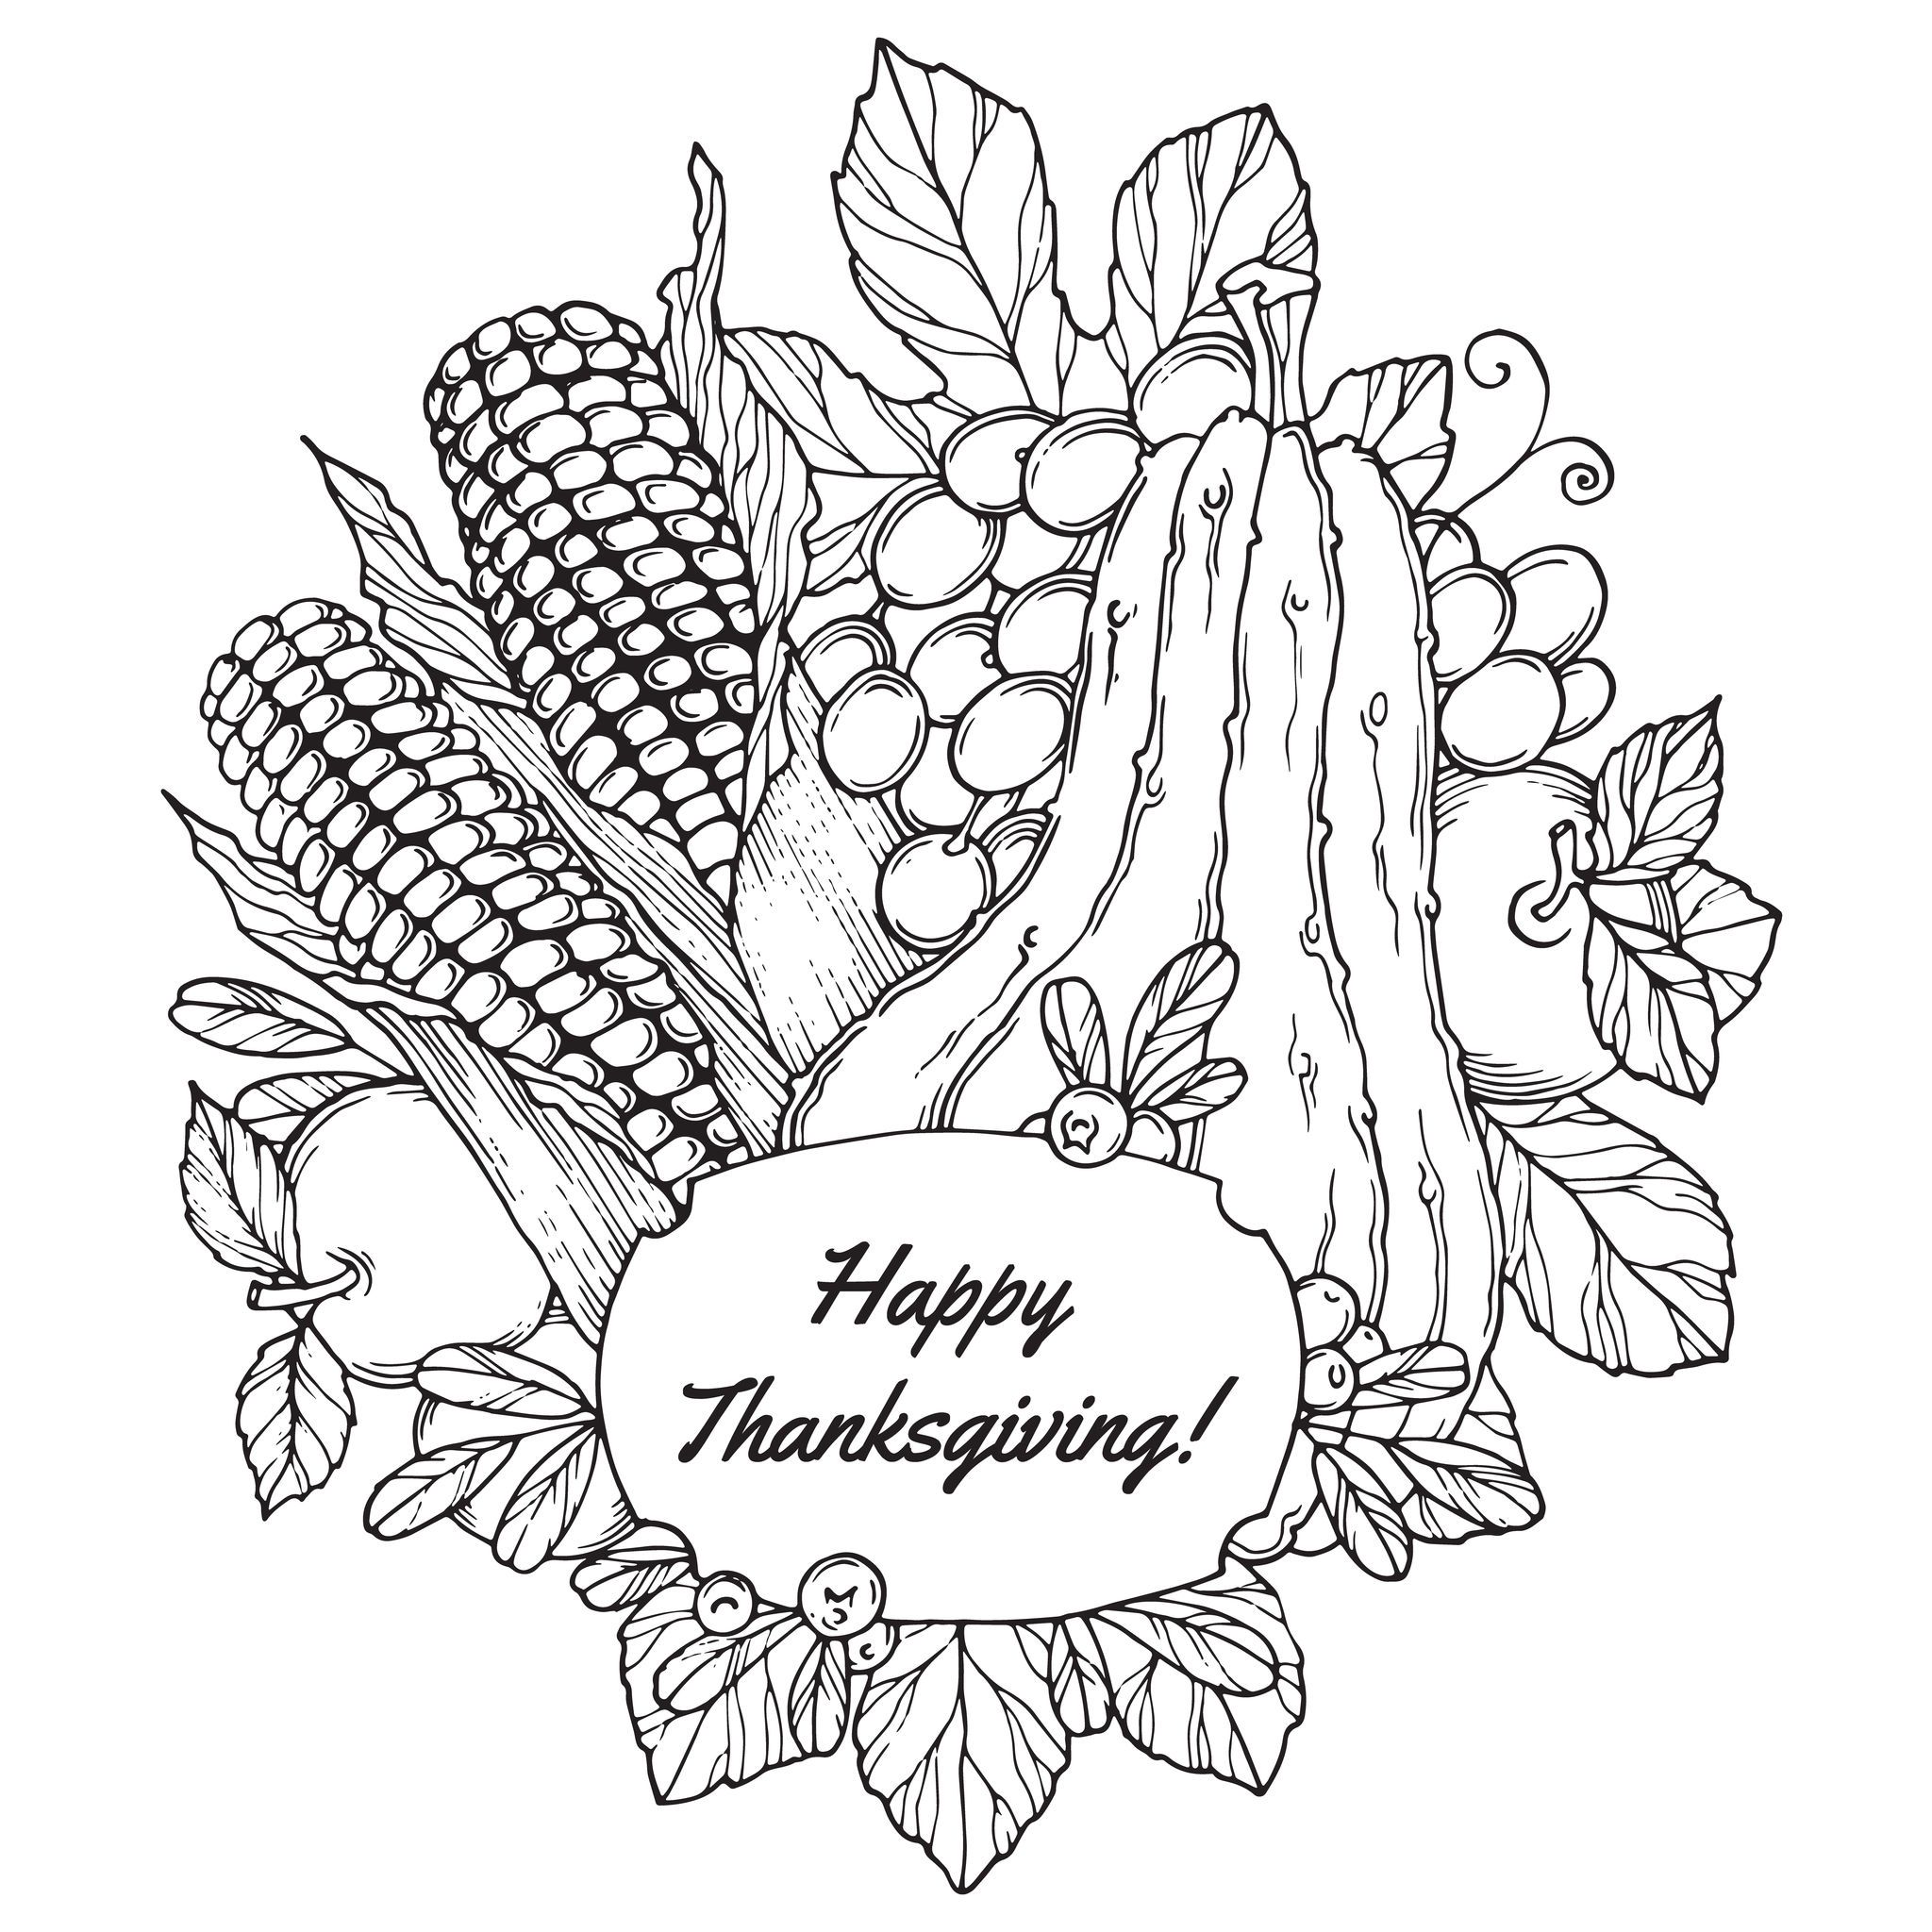 214 Cartoon Free Thanksgiving Coloring Pages For Kids for Adult